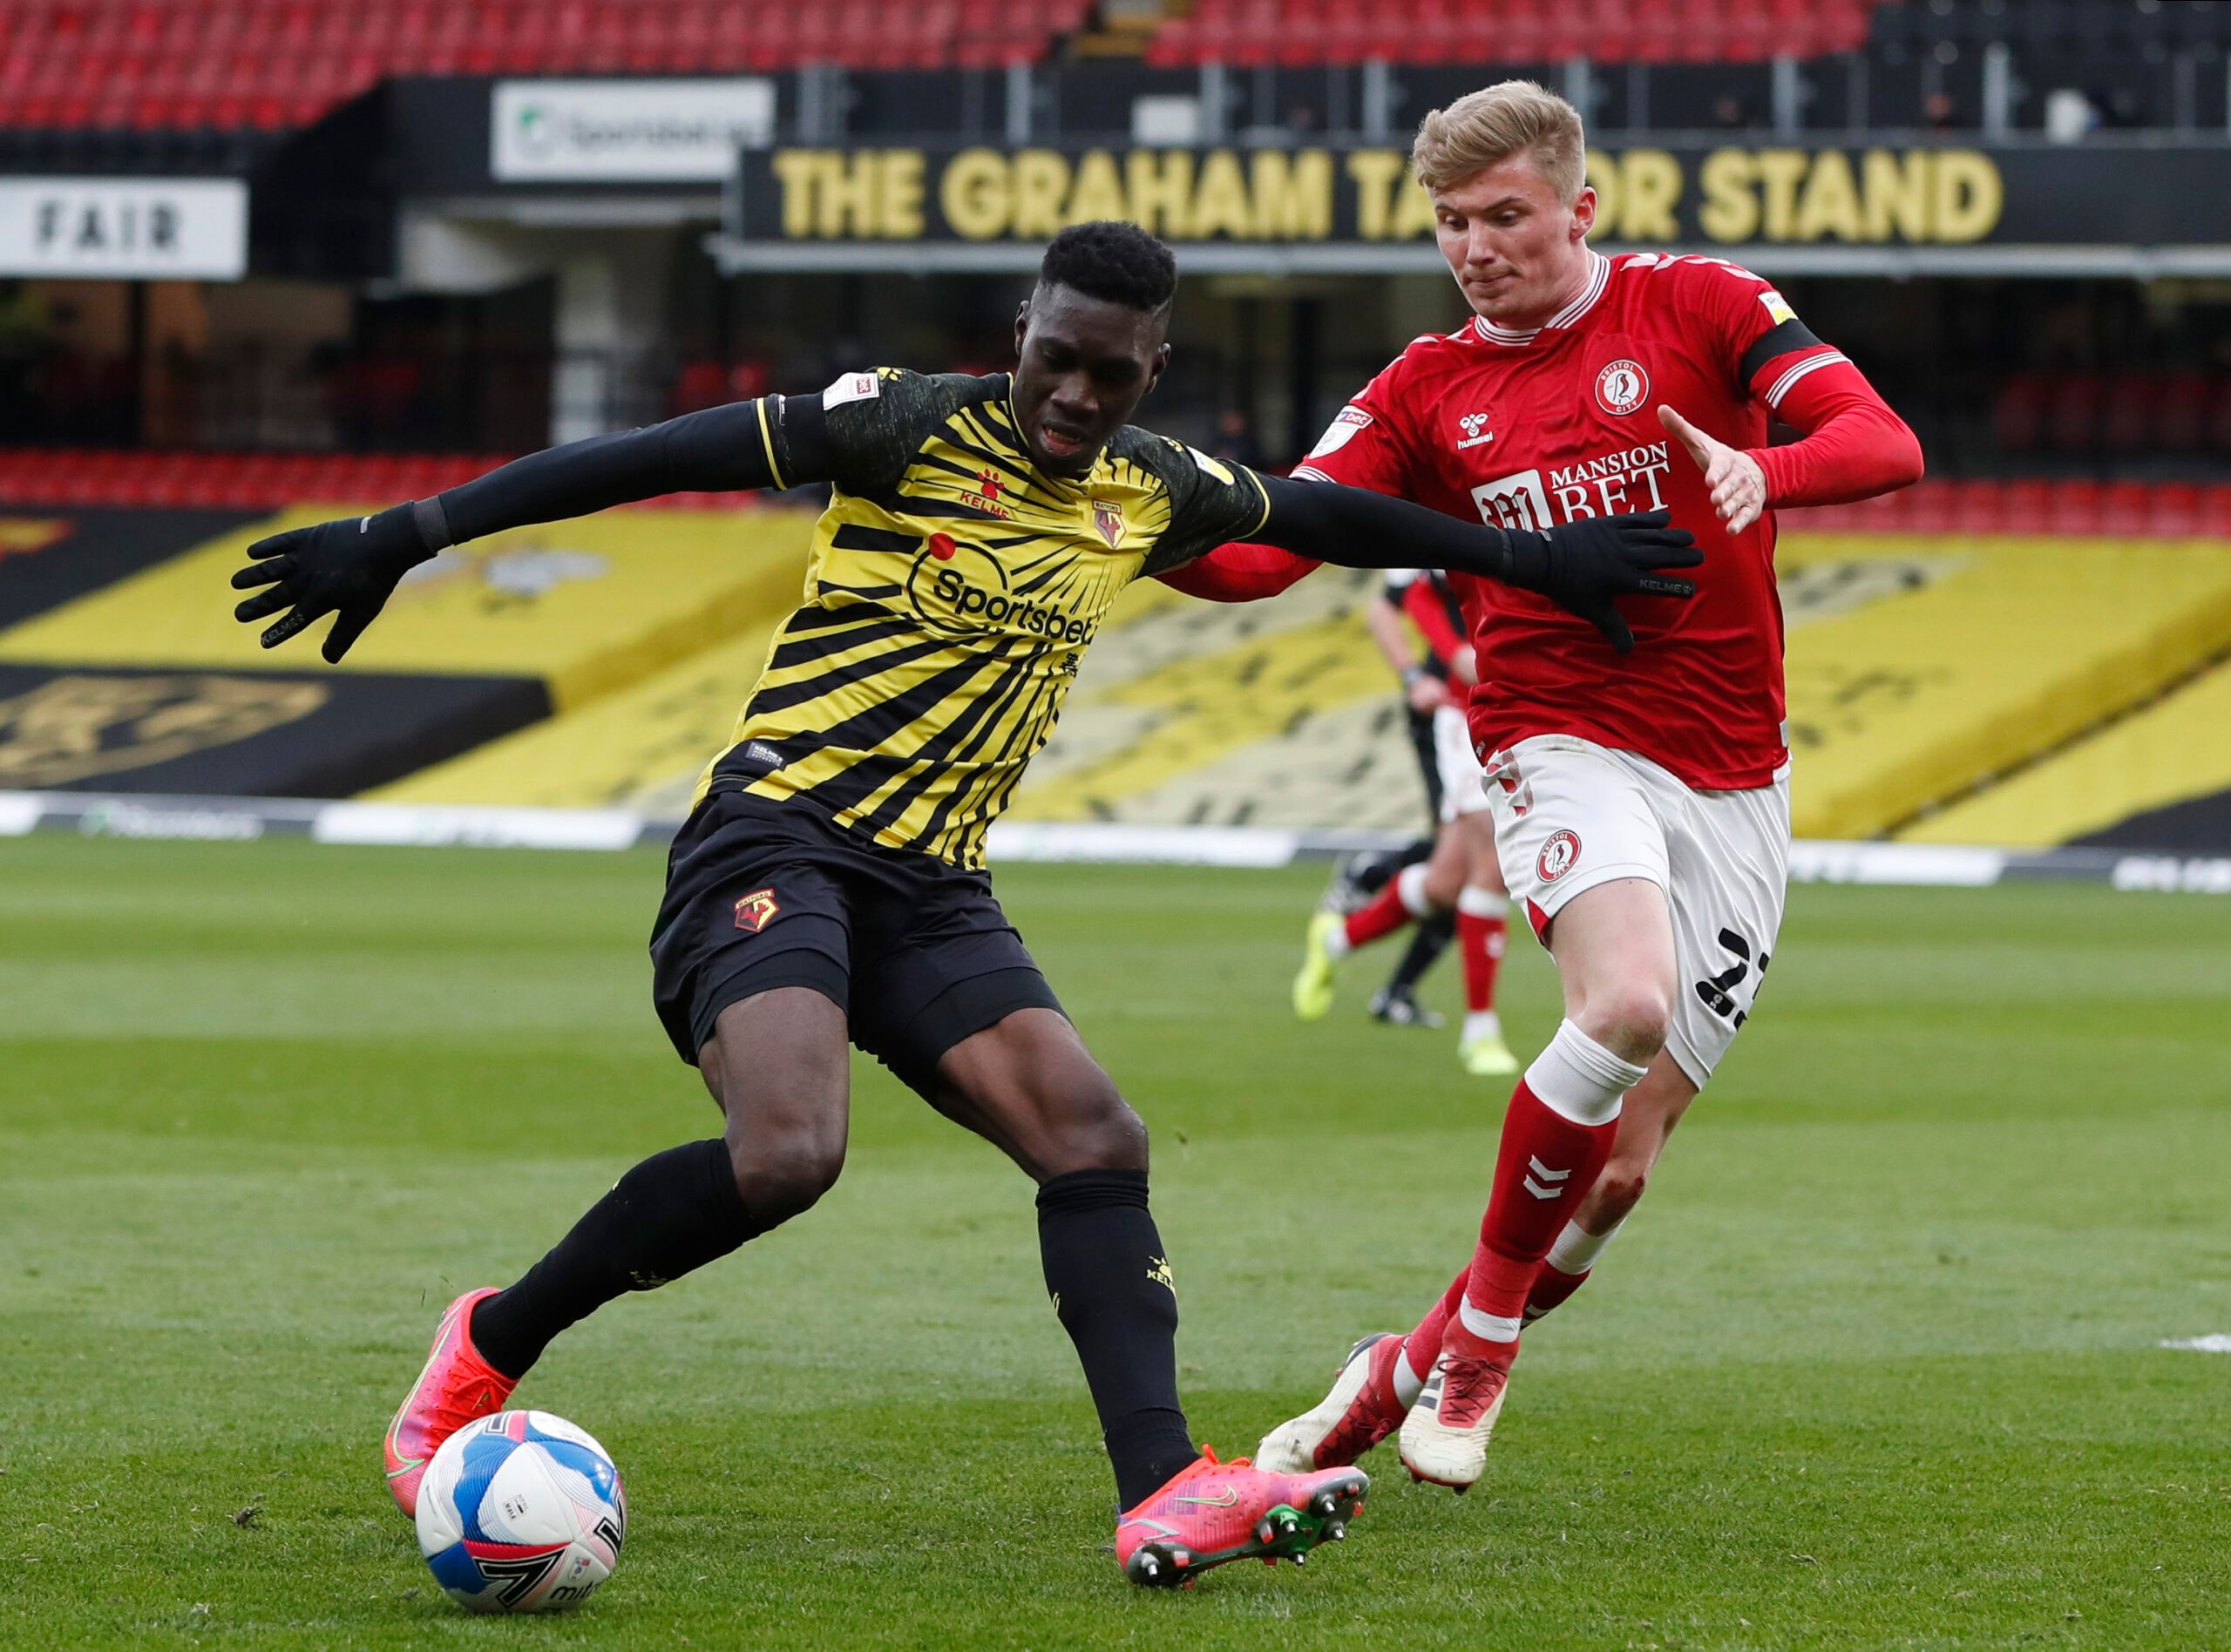 Soccer Football - Championship - Watford v Bristol City - Vicarage Road, Watford, Britain - February 13, 2021 Watford's Ismaila Sarr and Bristol City's Taylor Moore Action Images/Paul Childs EDITORIAL USE ONLY. No use with unauthorized audio, video, data, fixture lists, club/league logos or 'live' services. Online in-match use limited to 75 images, no video emulation. No use in betting, games or single club /league/player publications.  Please contact your account representative for further deta